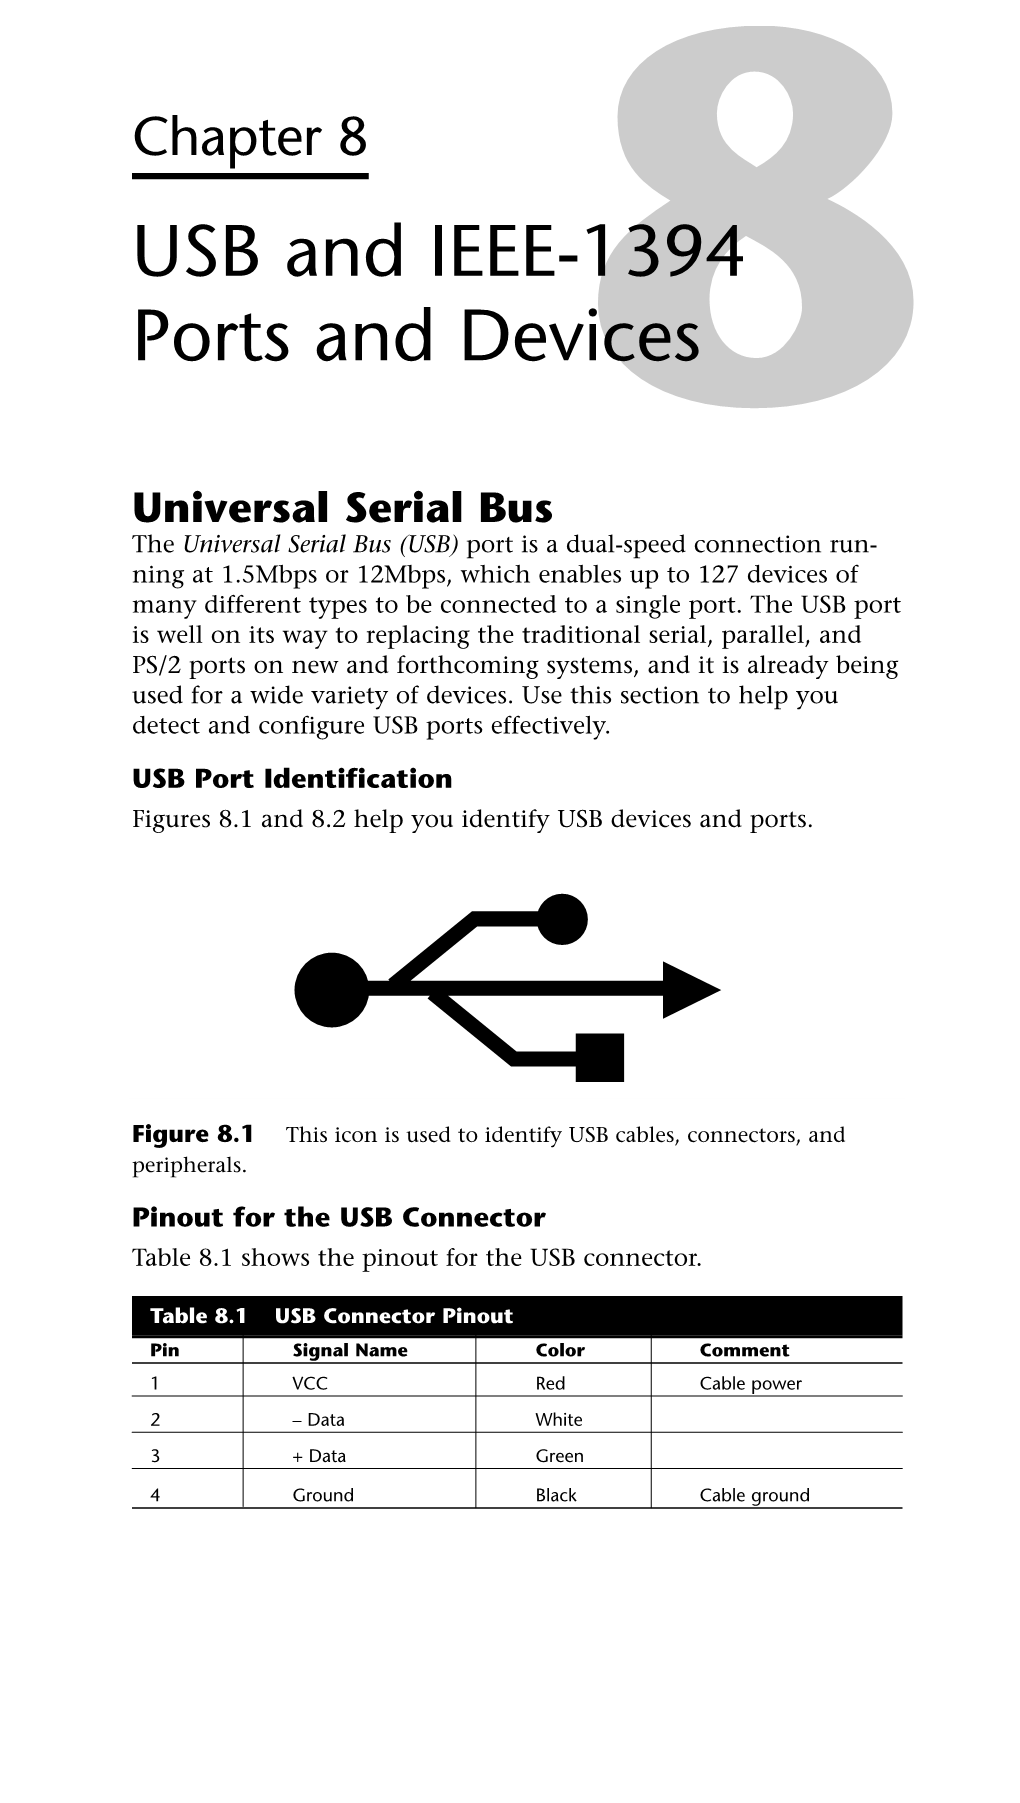 USB and IEEE-1394 Ports and Devices